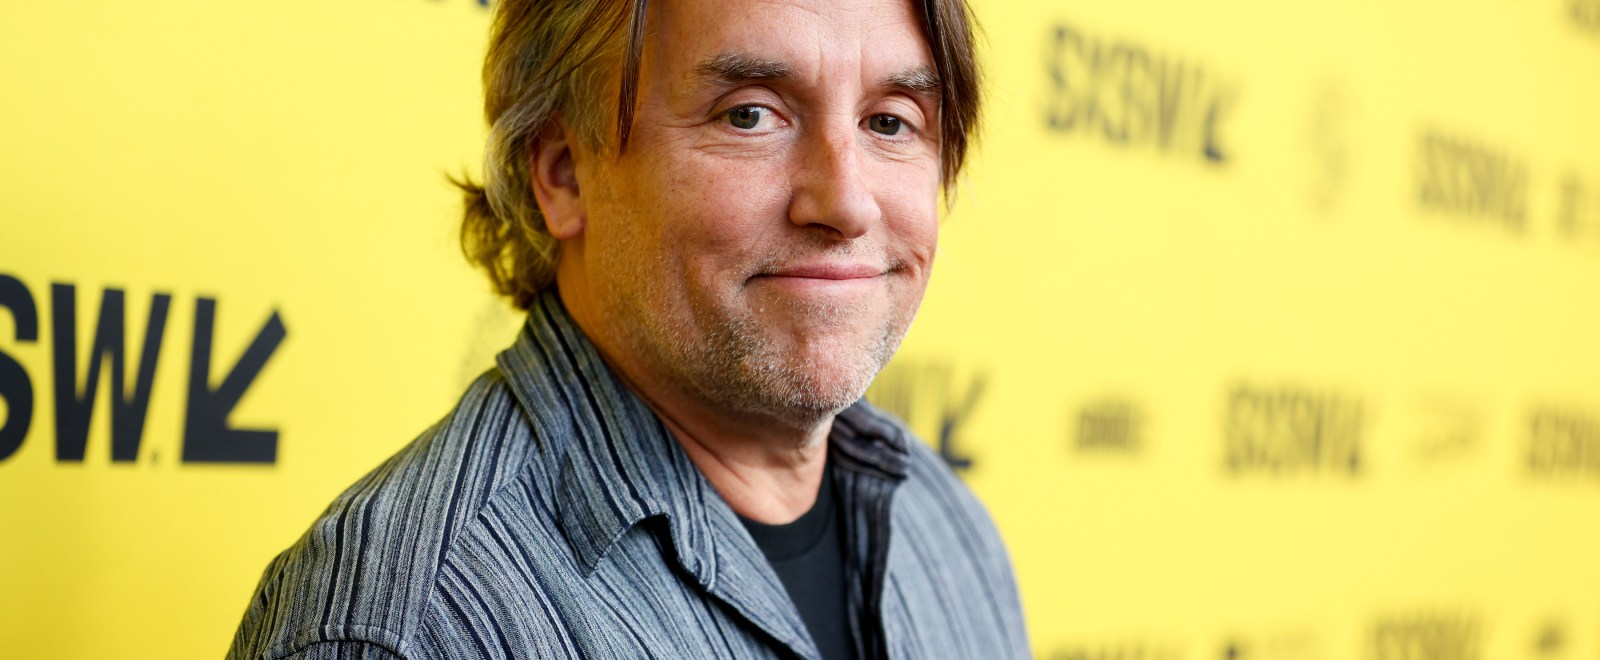 Richard Linklater attends the premiere of "Apollo 10 1/2: A Space Age Childhood" during the 2022 SXSW Conference and Festivals at The Paramount Theatre on March 13, 2022 in Austin, Texas. (Photo by Rich Fury/Getty Images for SXSW)